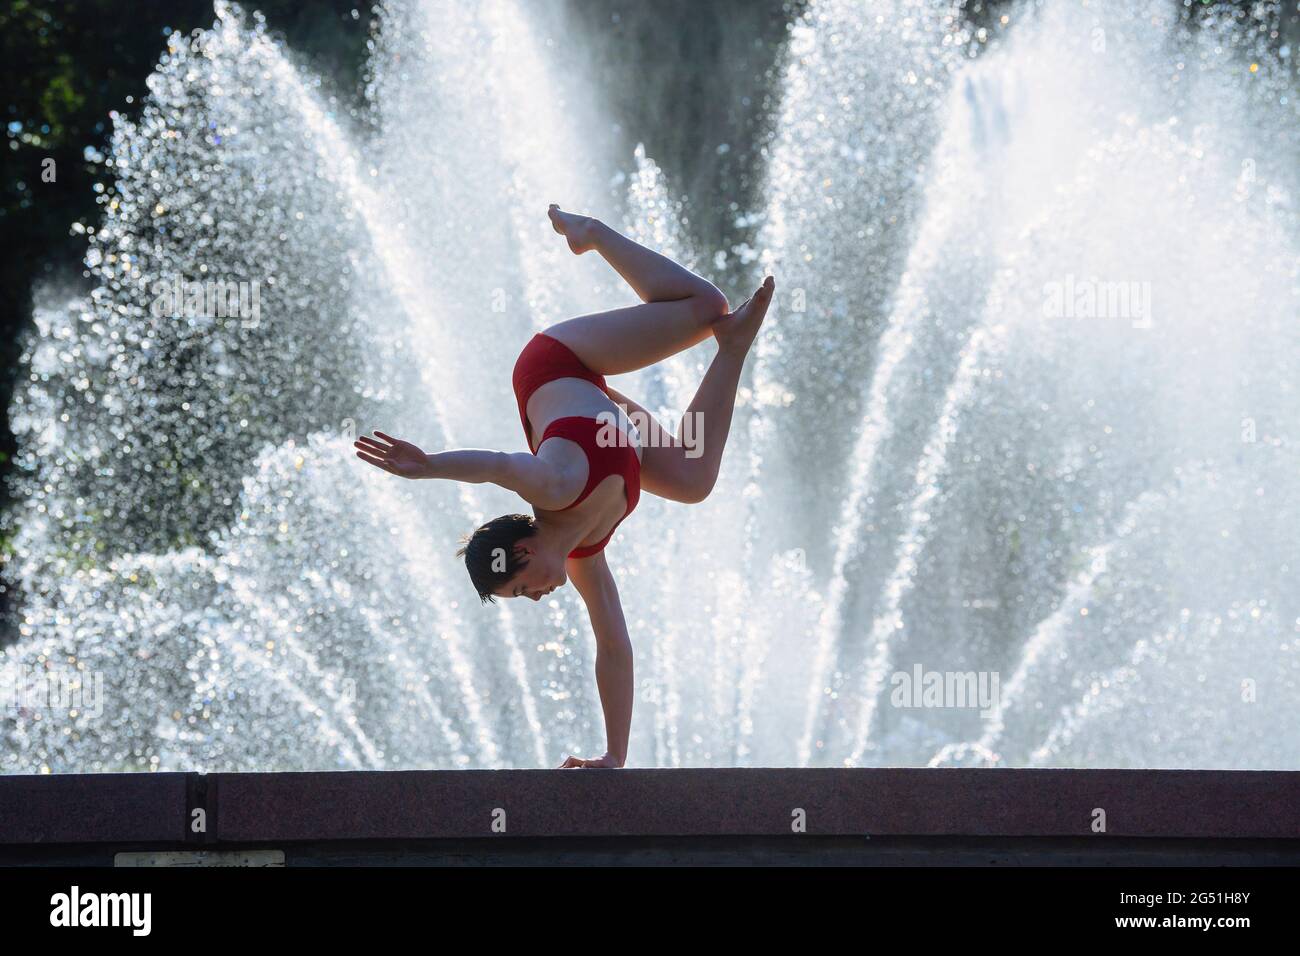 Woman doing acrobatic handstand pose against fountain Stock Photo